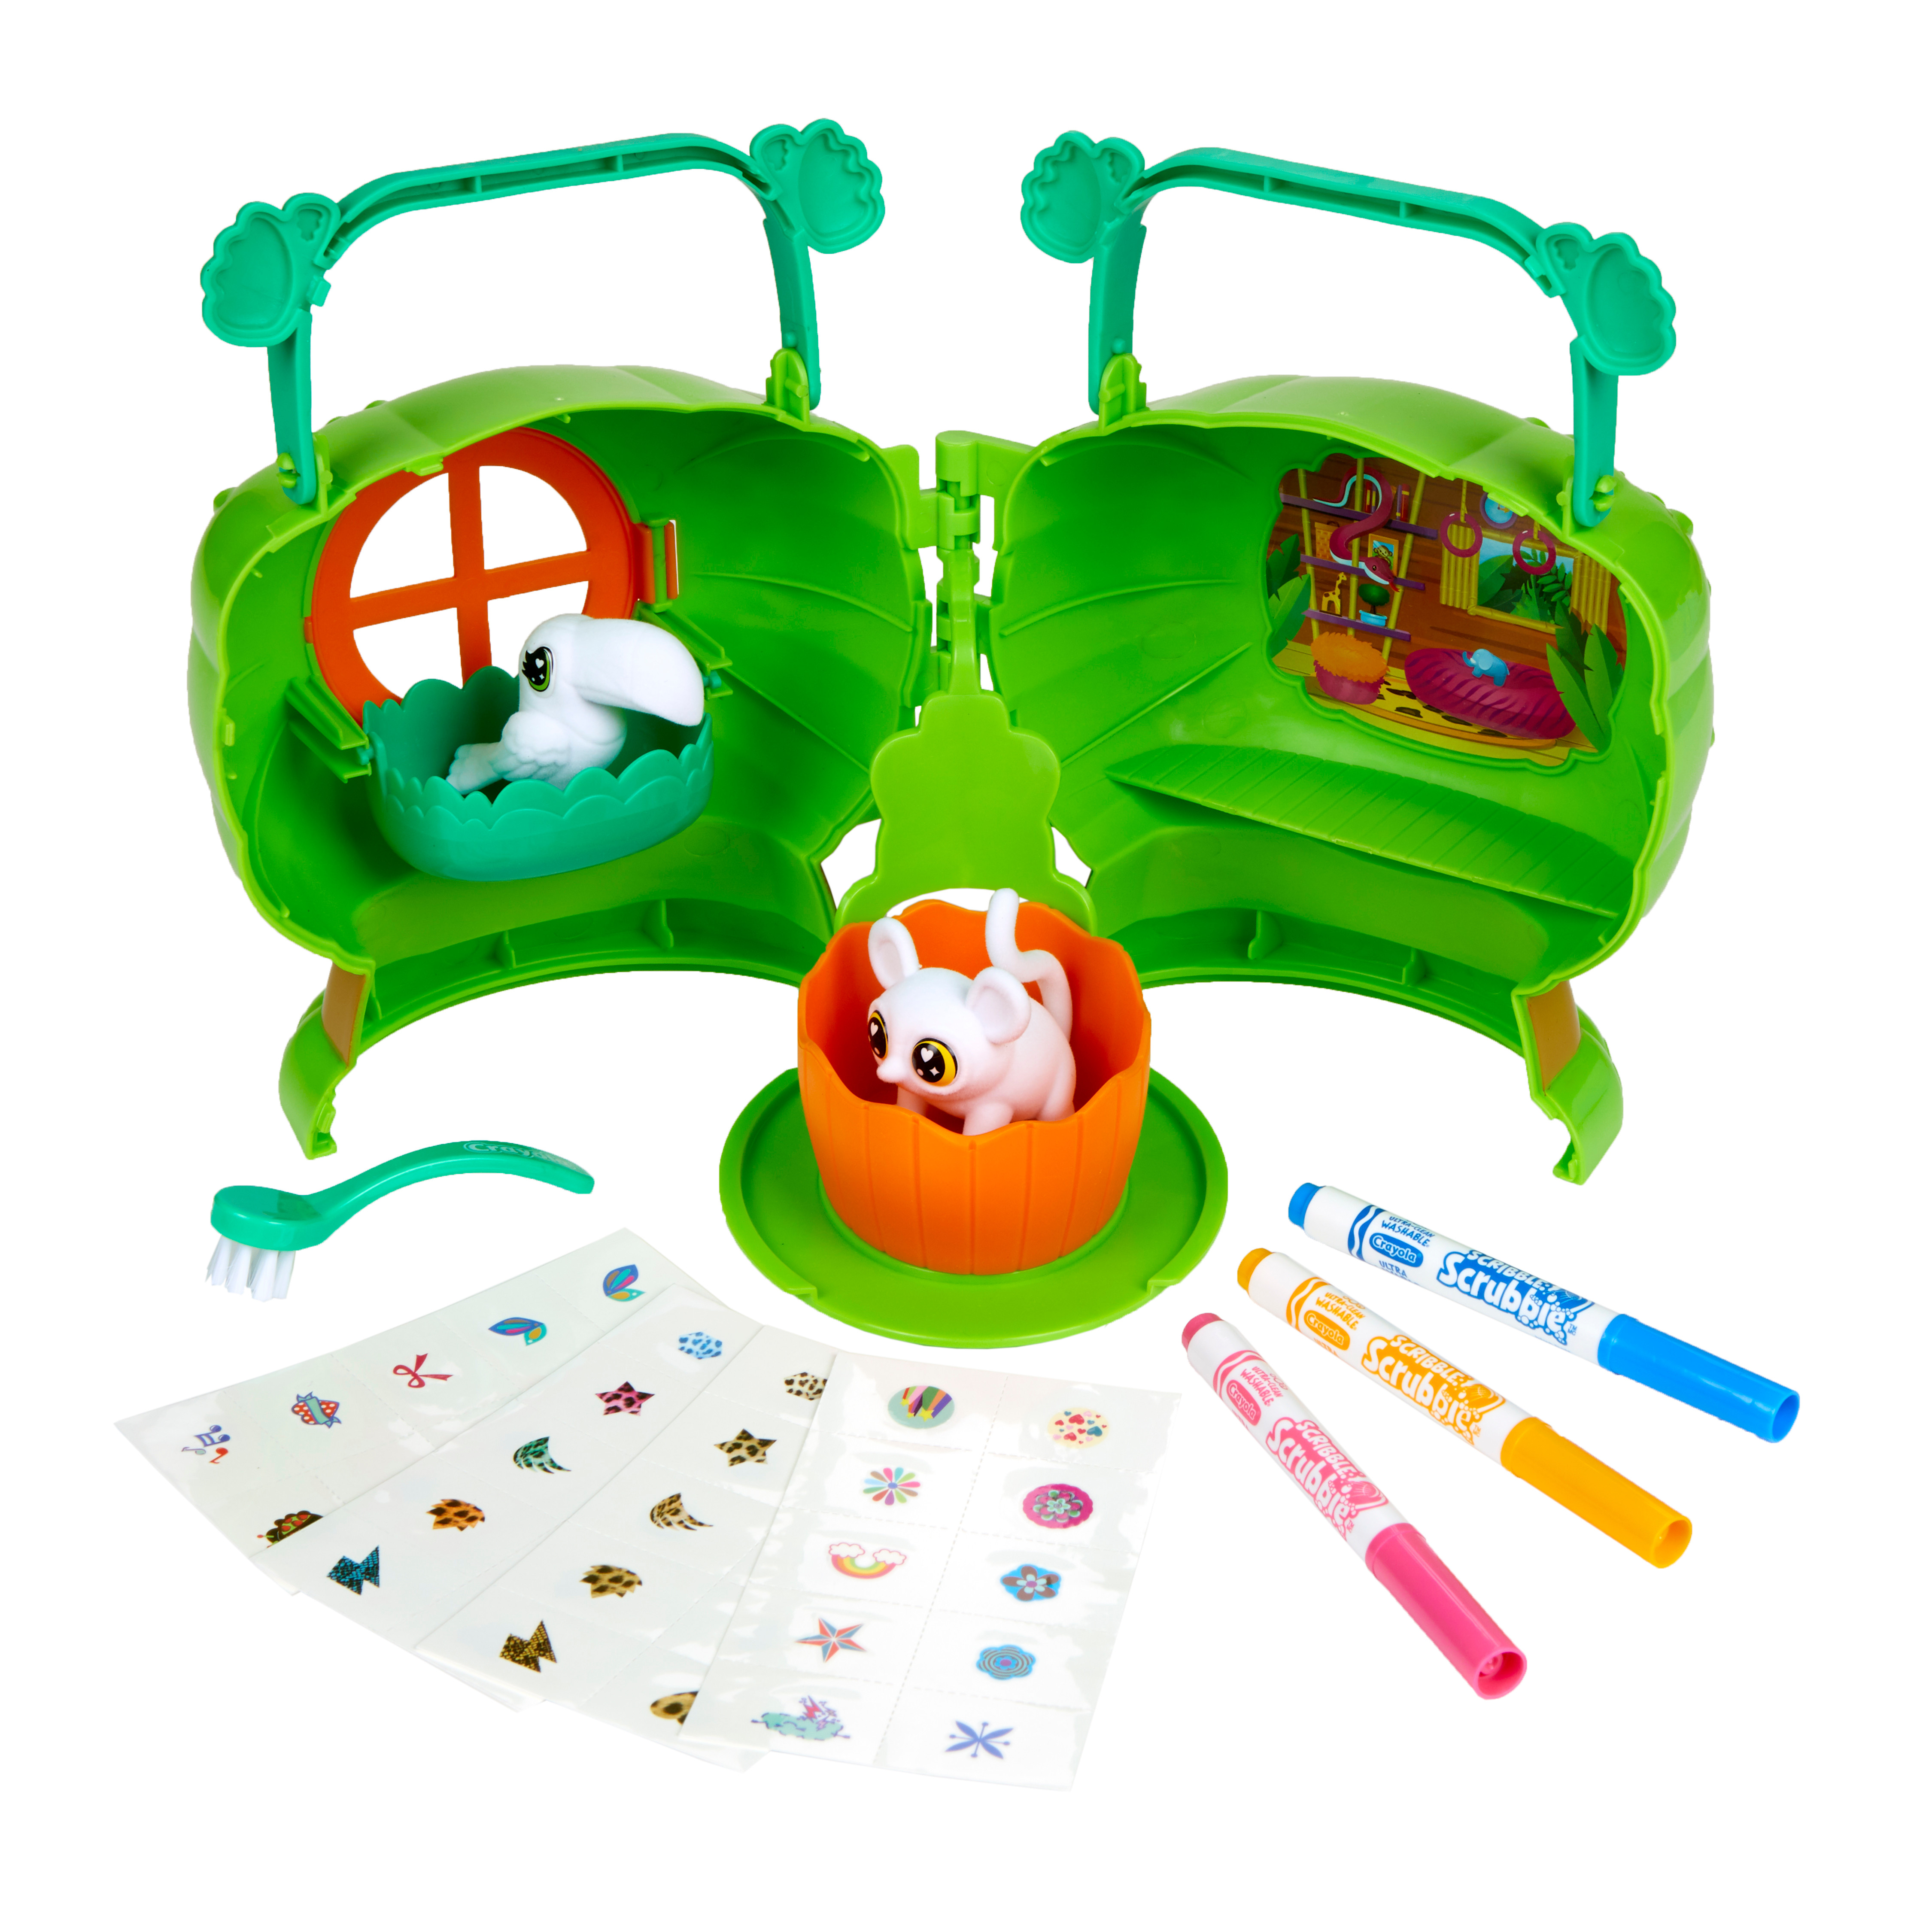 Crayola Scribble Scrubbie Pets Safari Treehouse Toy Set, Coloring Toys & Gifts, Beginner Unisex Child - image 3 of 9